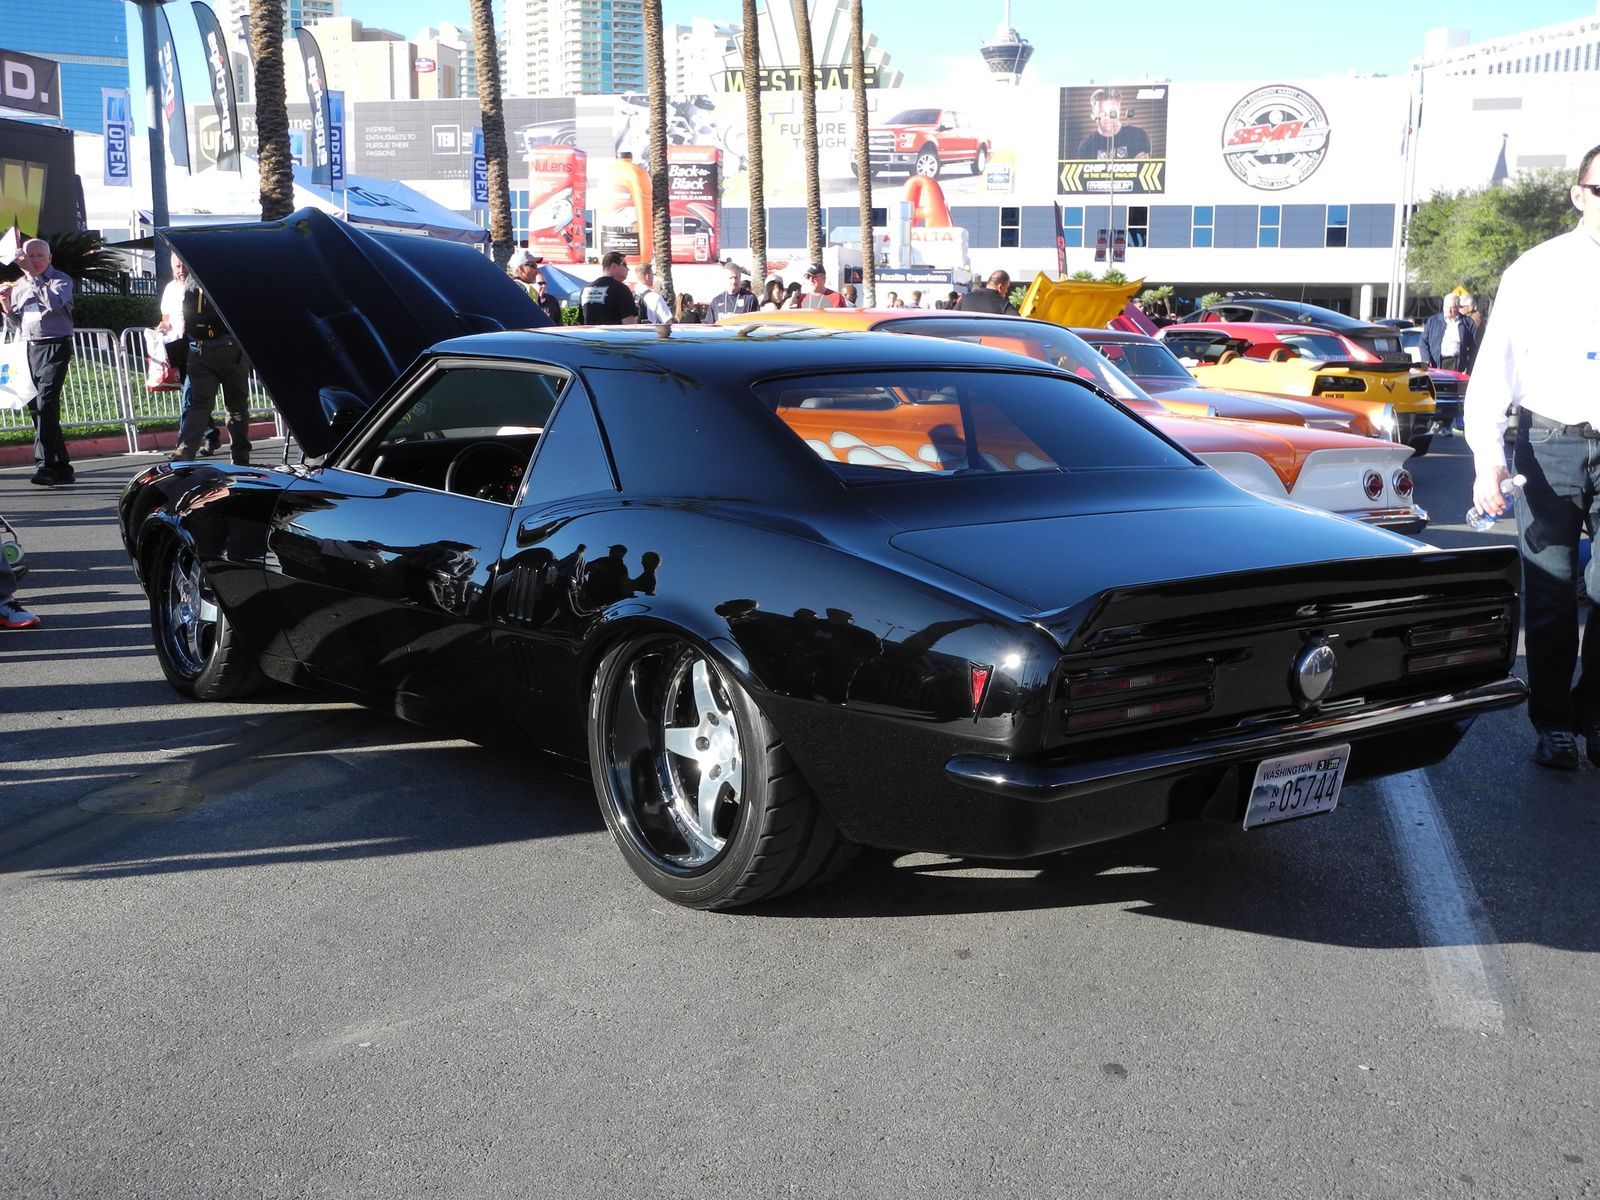 Check out Lenie Hamm's "Foulplay" '68 Firebird on Forge...